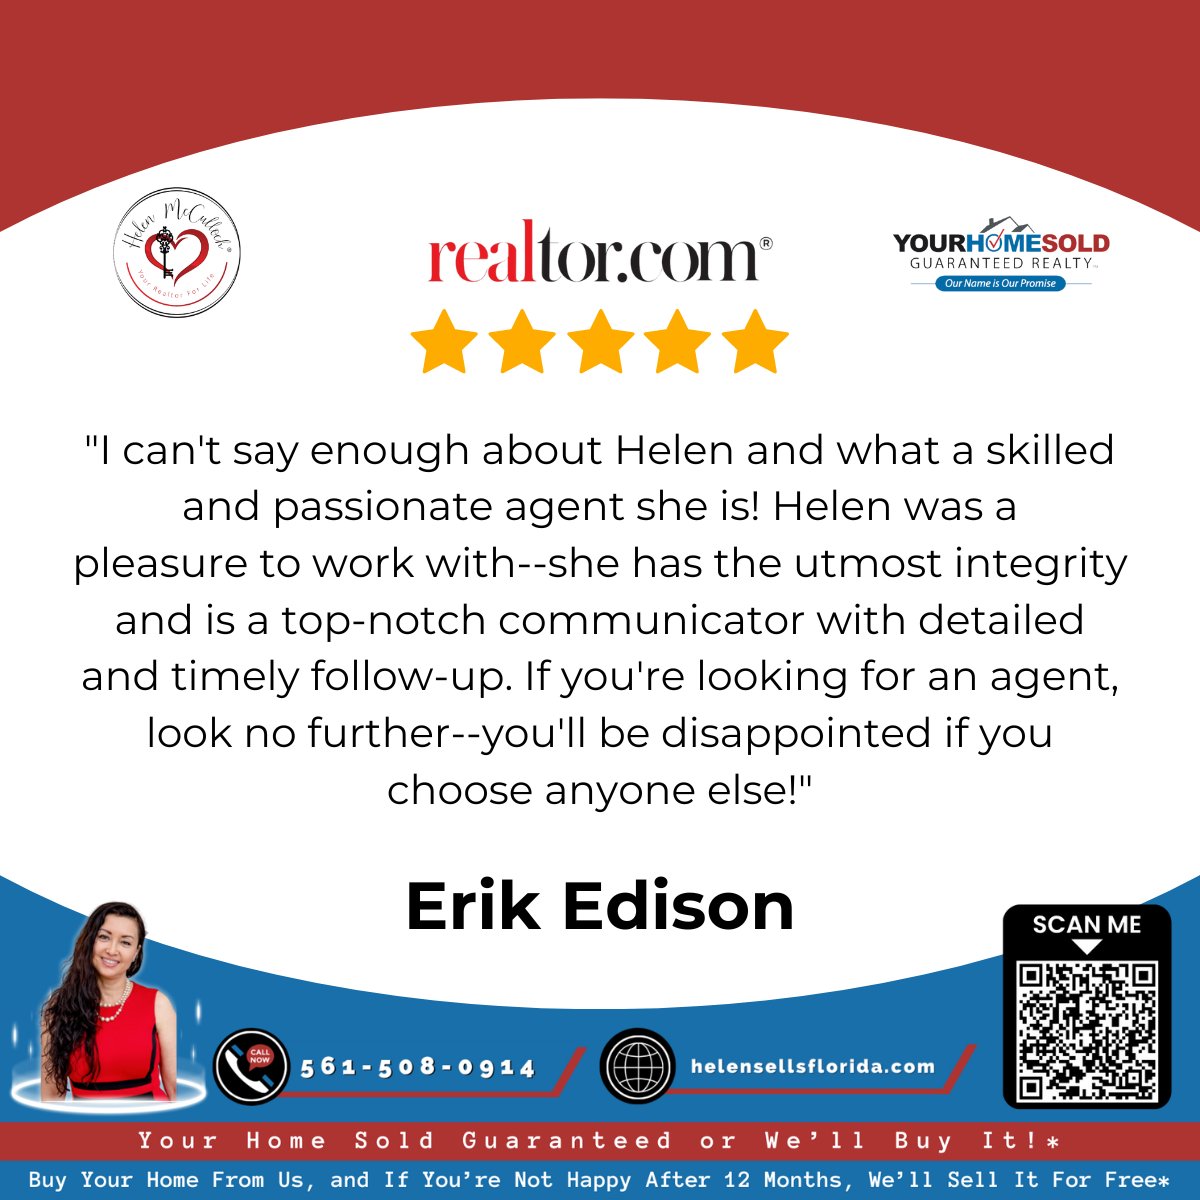 A Skilled And Passionate Agent!

Call 📞561-508-0914 or Click👉 bit.ly/3S9VQp7 for your real estate needs!

#Realtor #RealtorFL #RealEstateFlorida #Reviews #RealEstateFL #RealEstateAgent #RealEstateAgentFL #FloridaRealtor